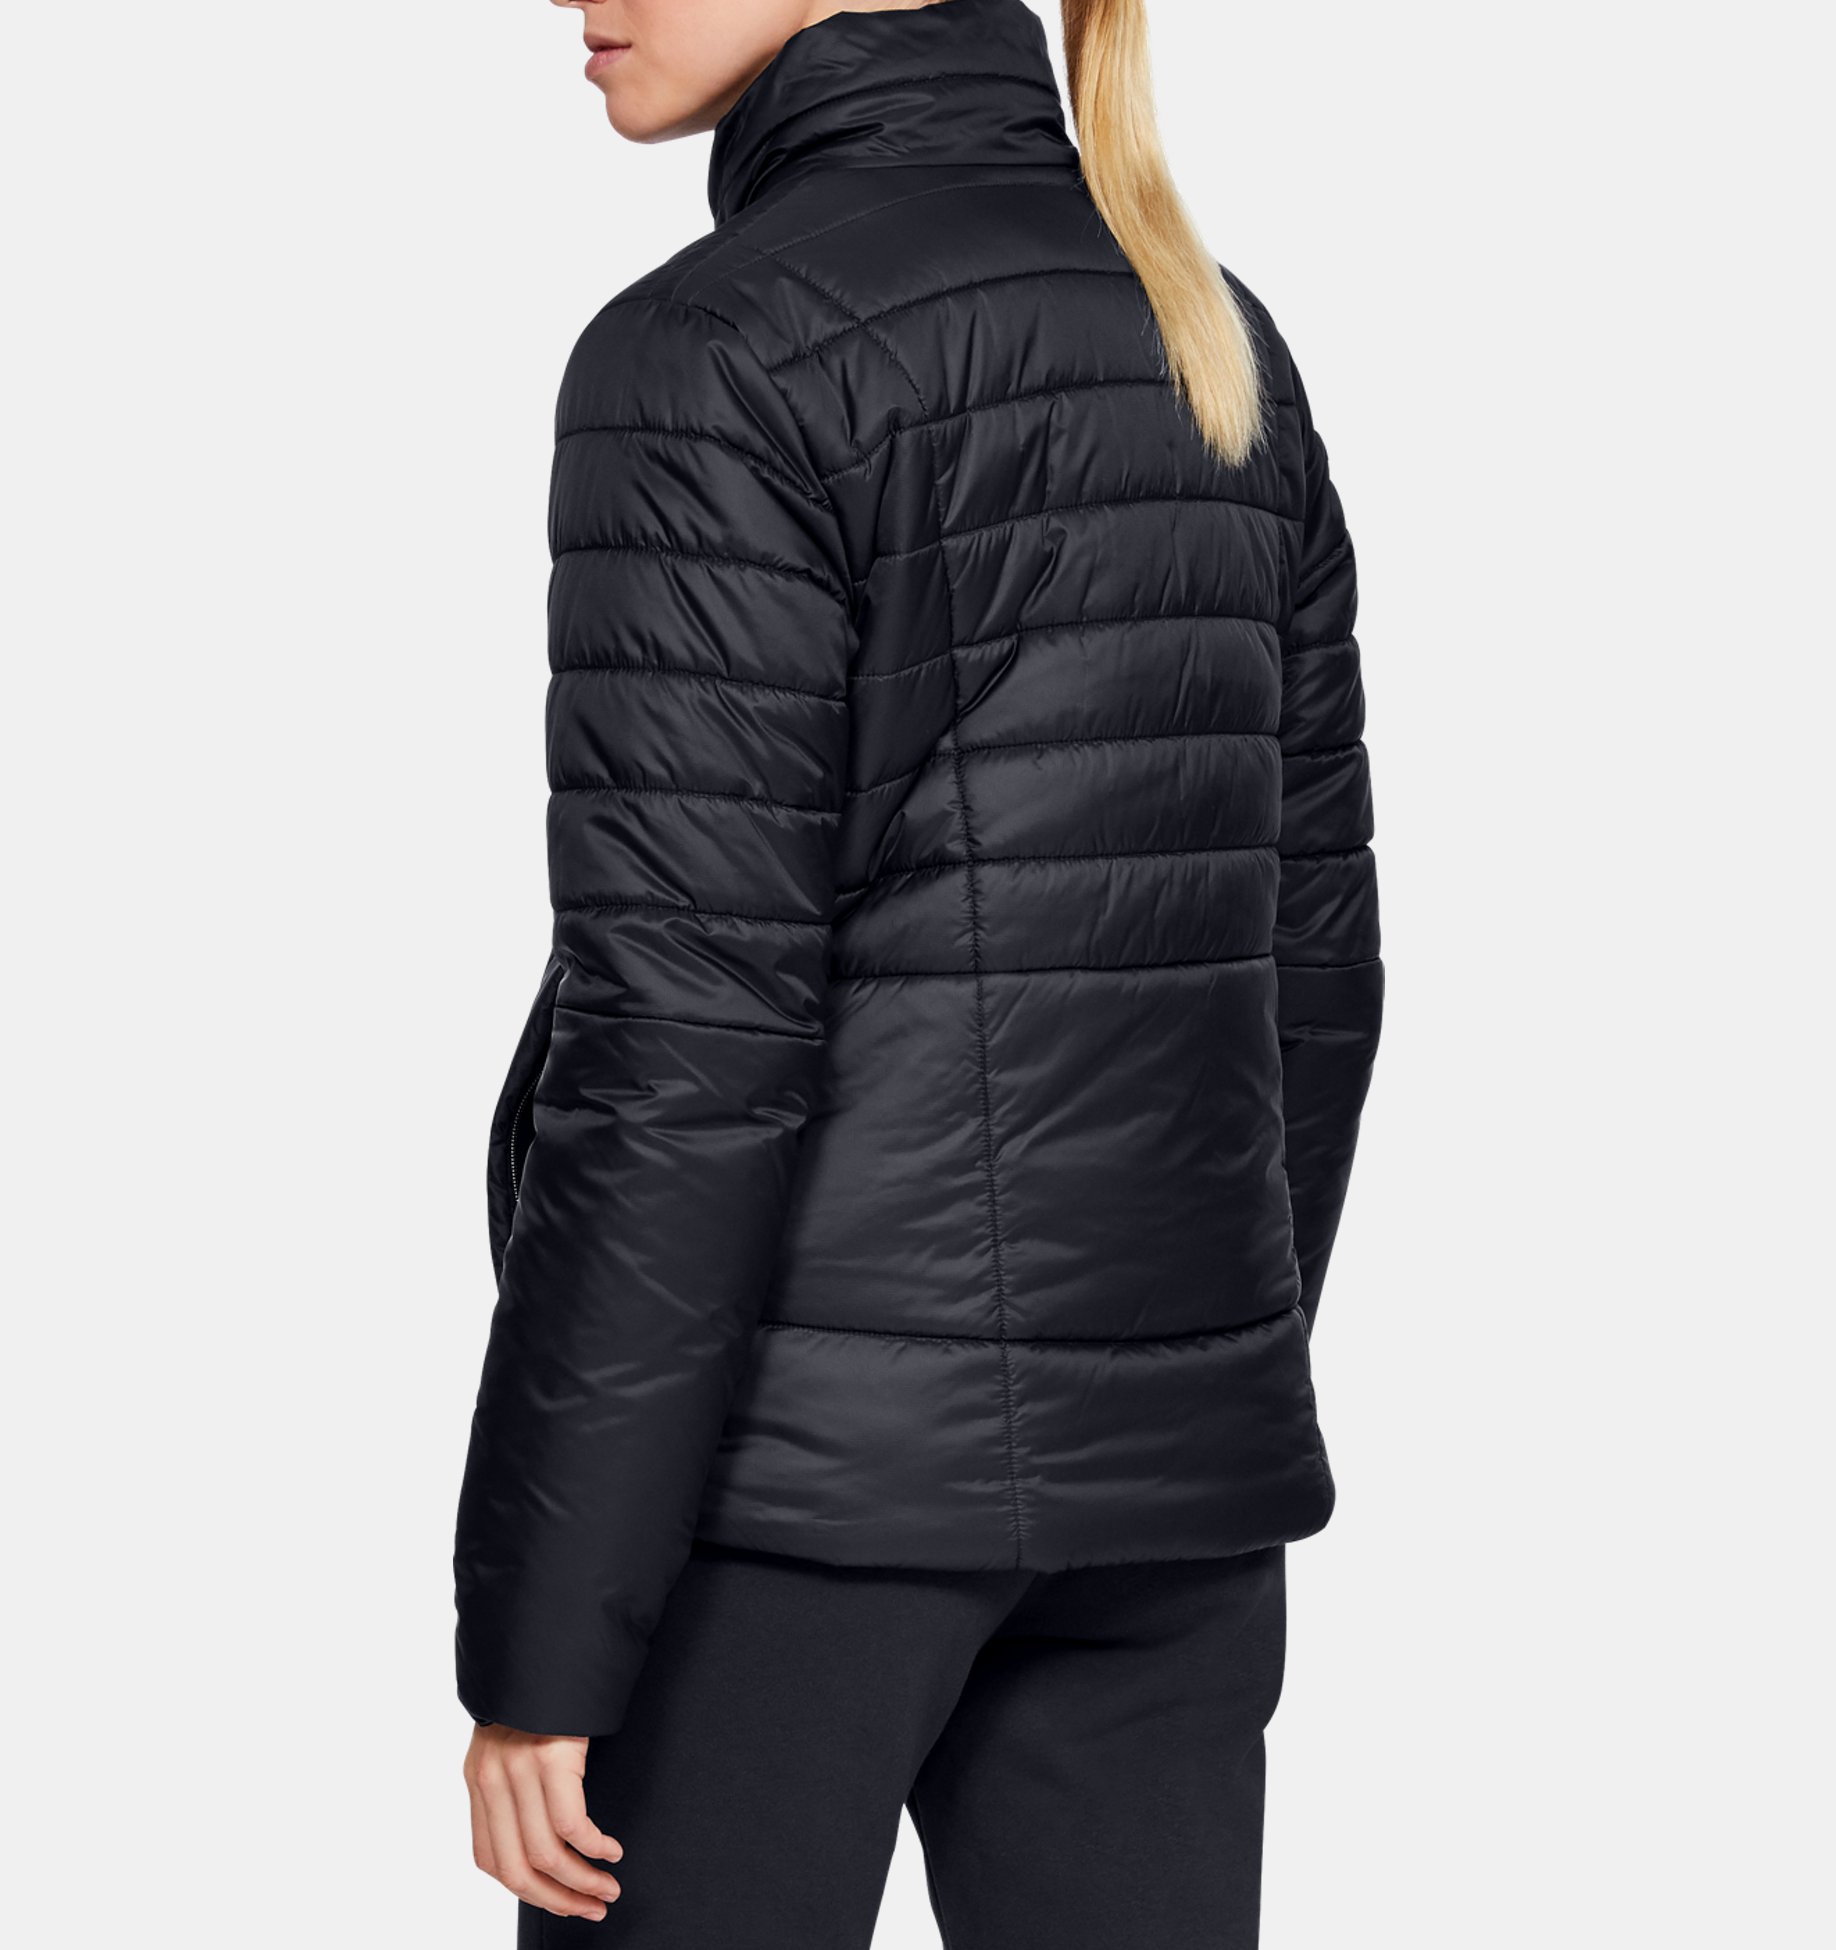 Women's UA Armour Insulated Jacket | Under Armour